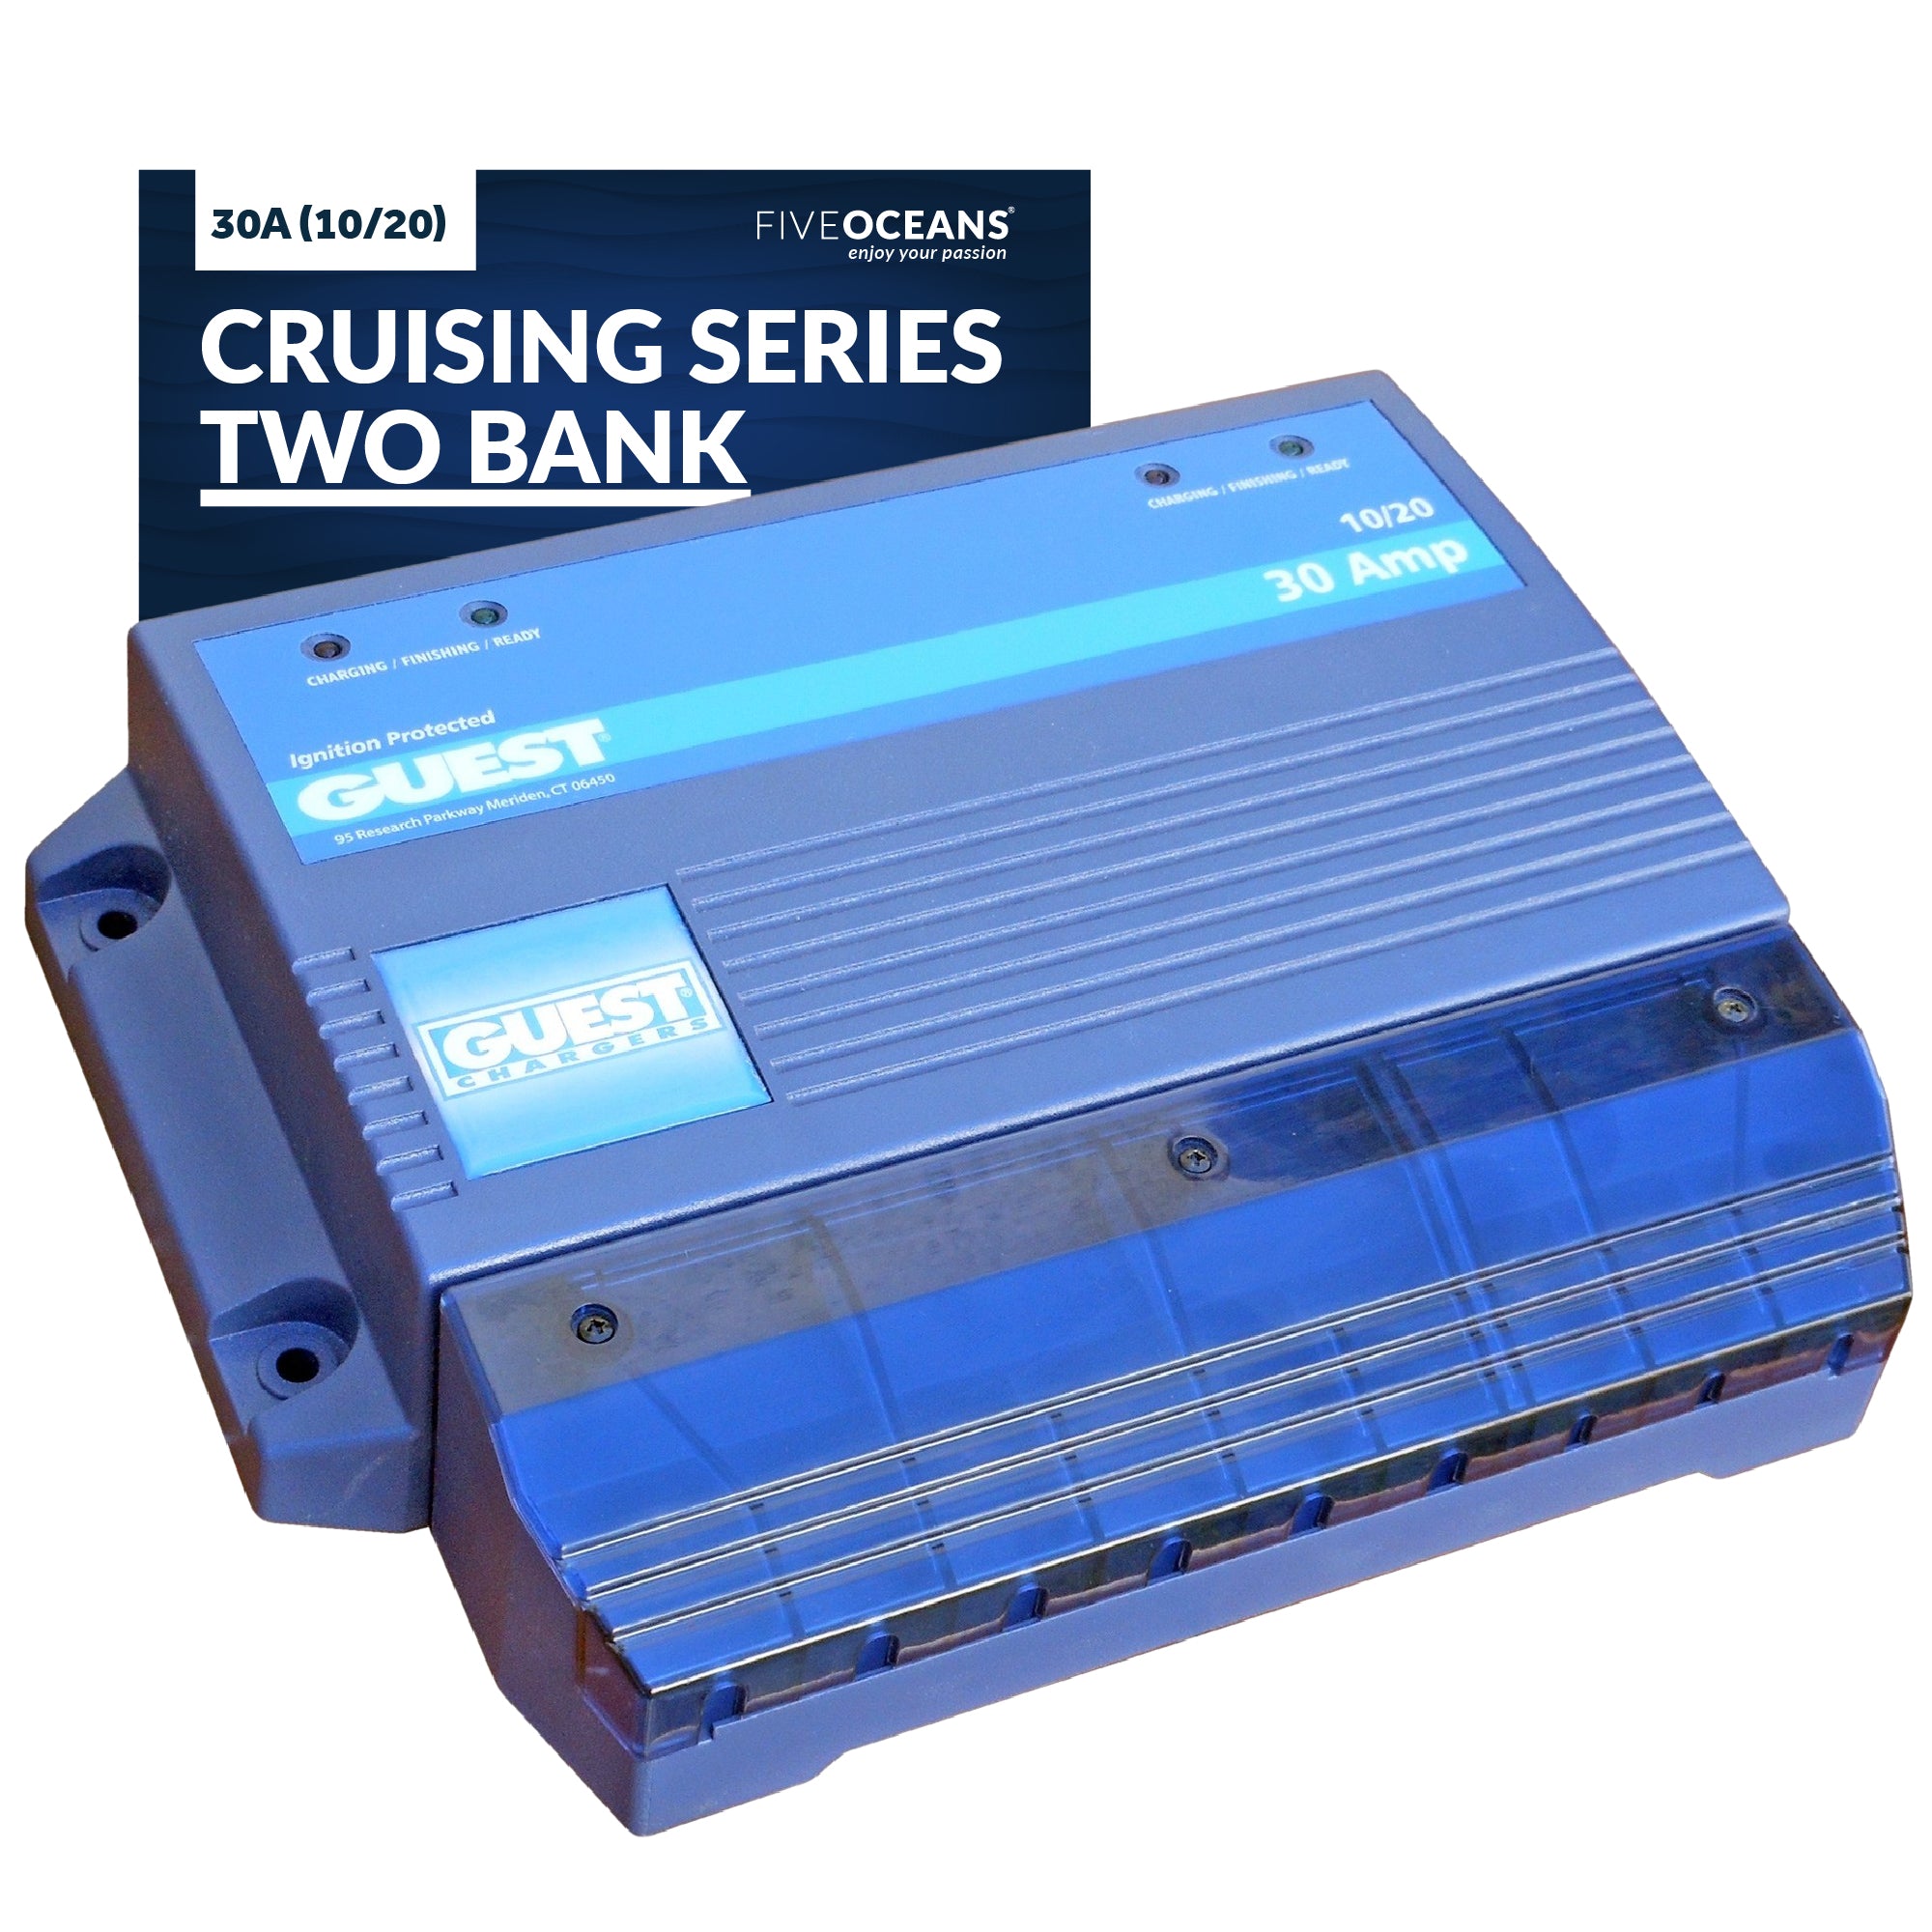 Cruising Series Two Bank 30a (10/20) 230v (50Hz) - FO3127